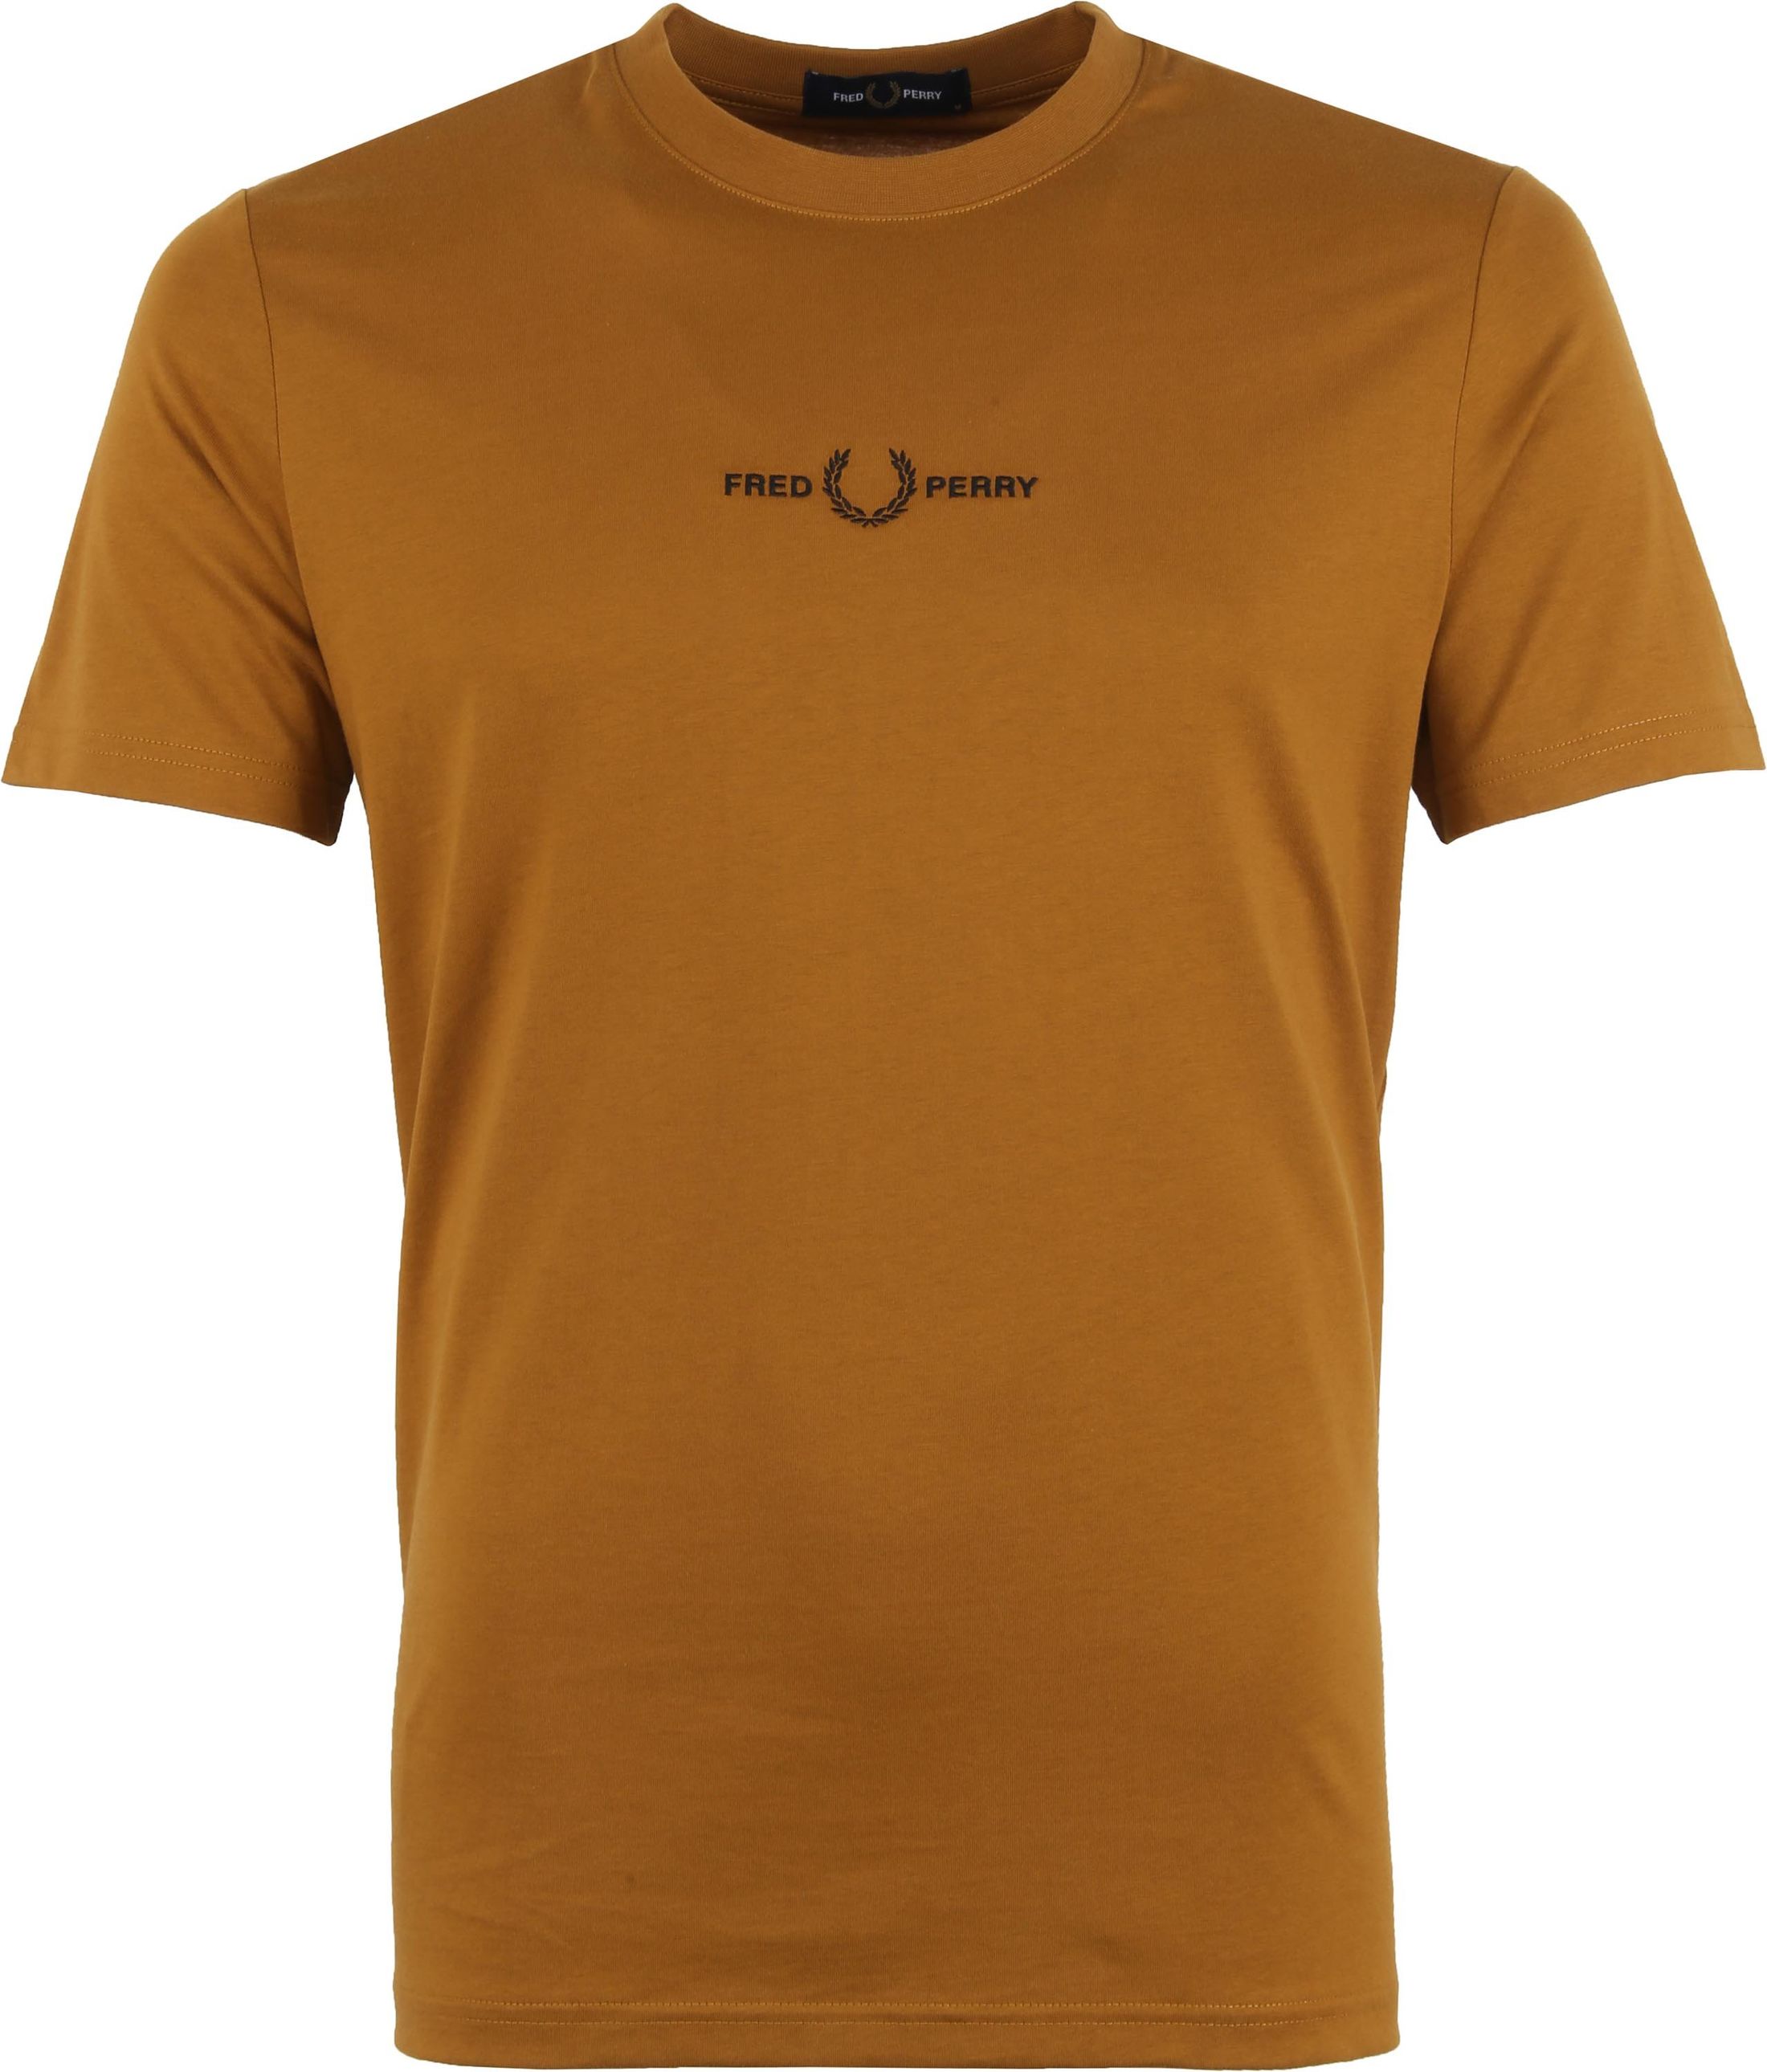 Fred Perry T-Shirt M2706 Caramel Brown size L